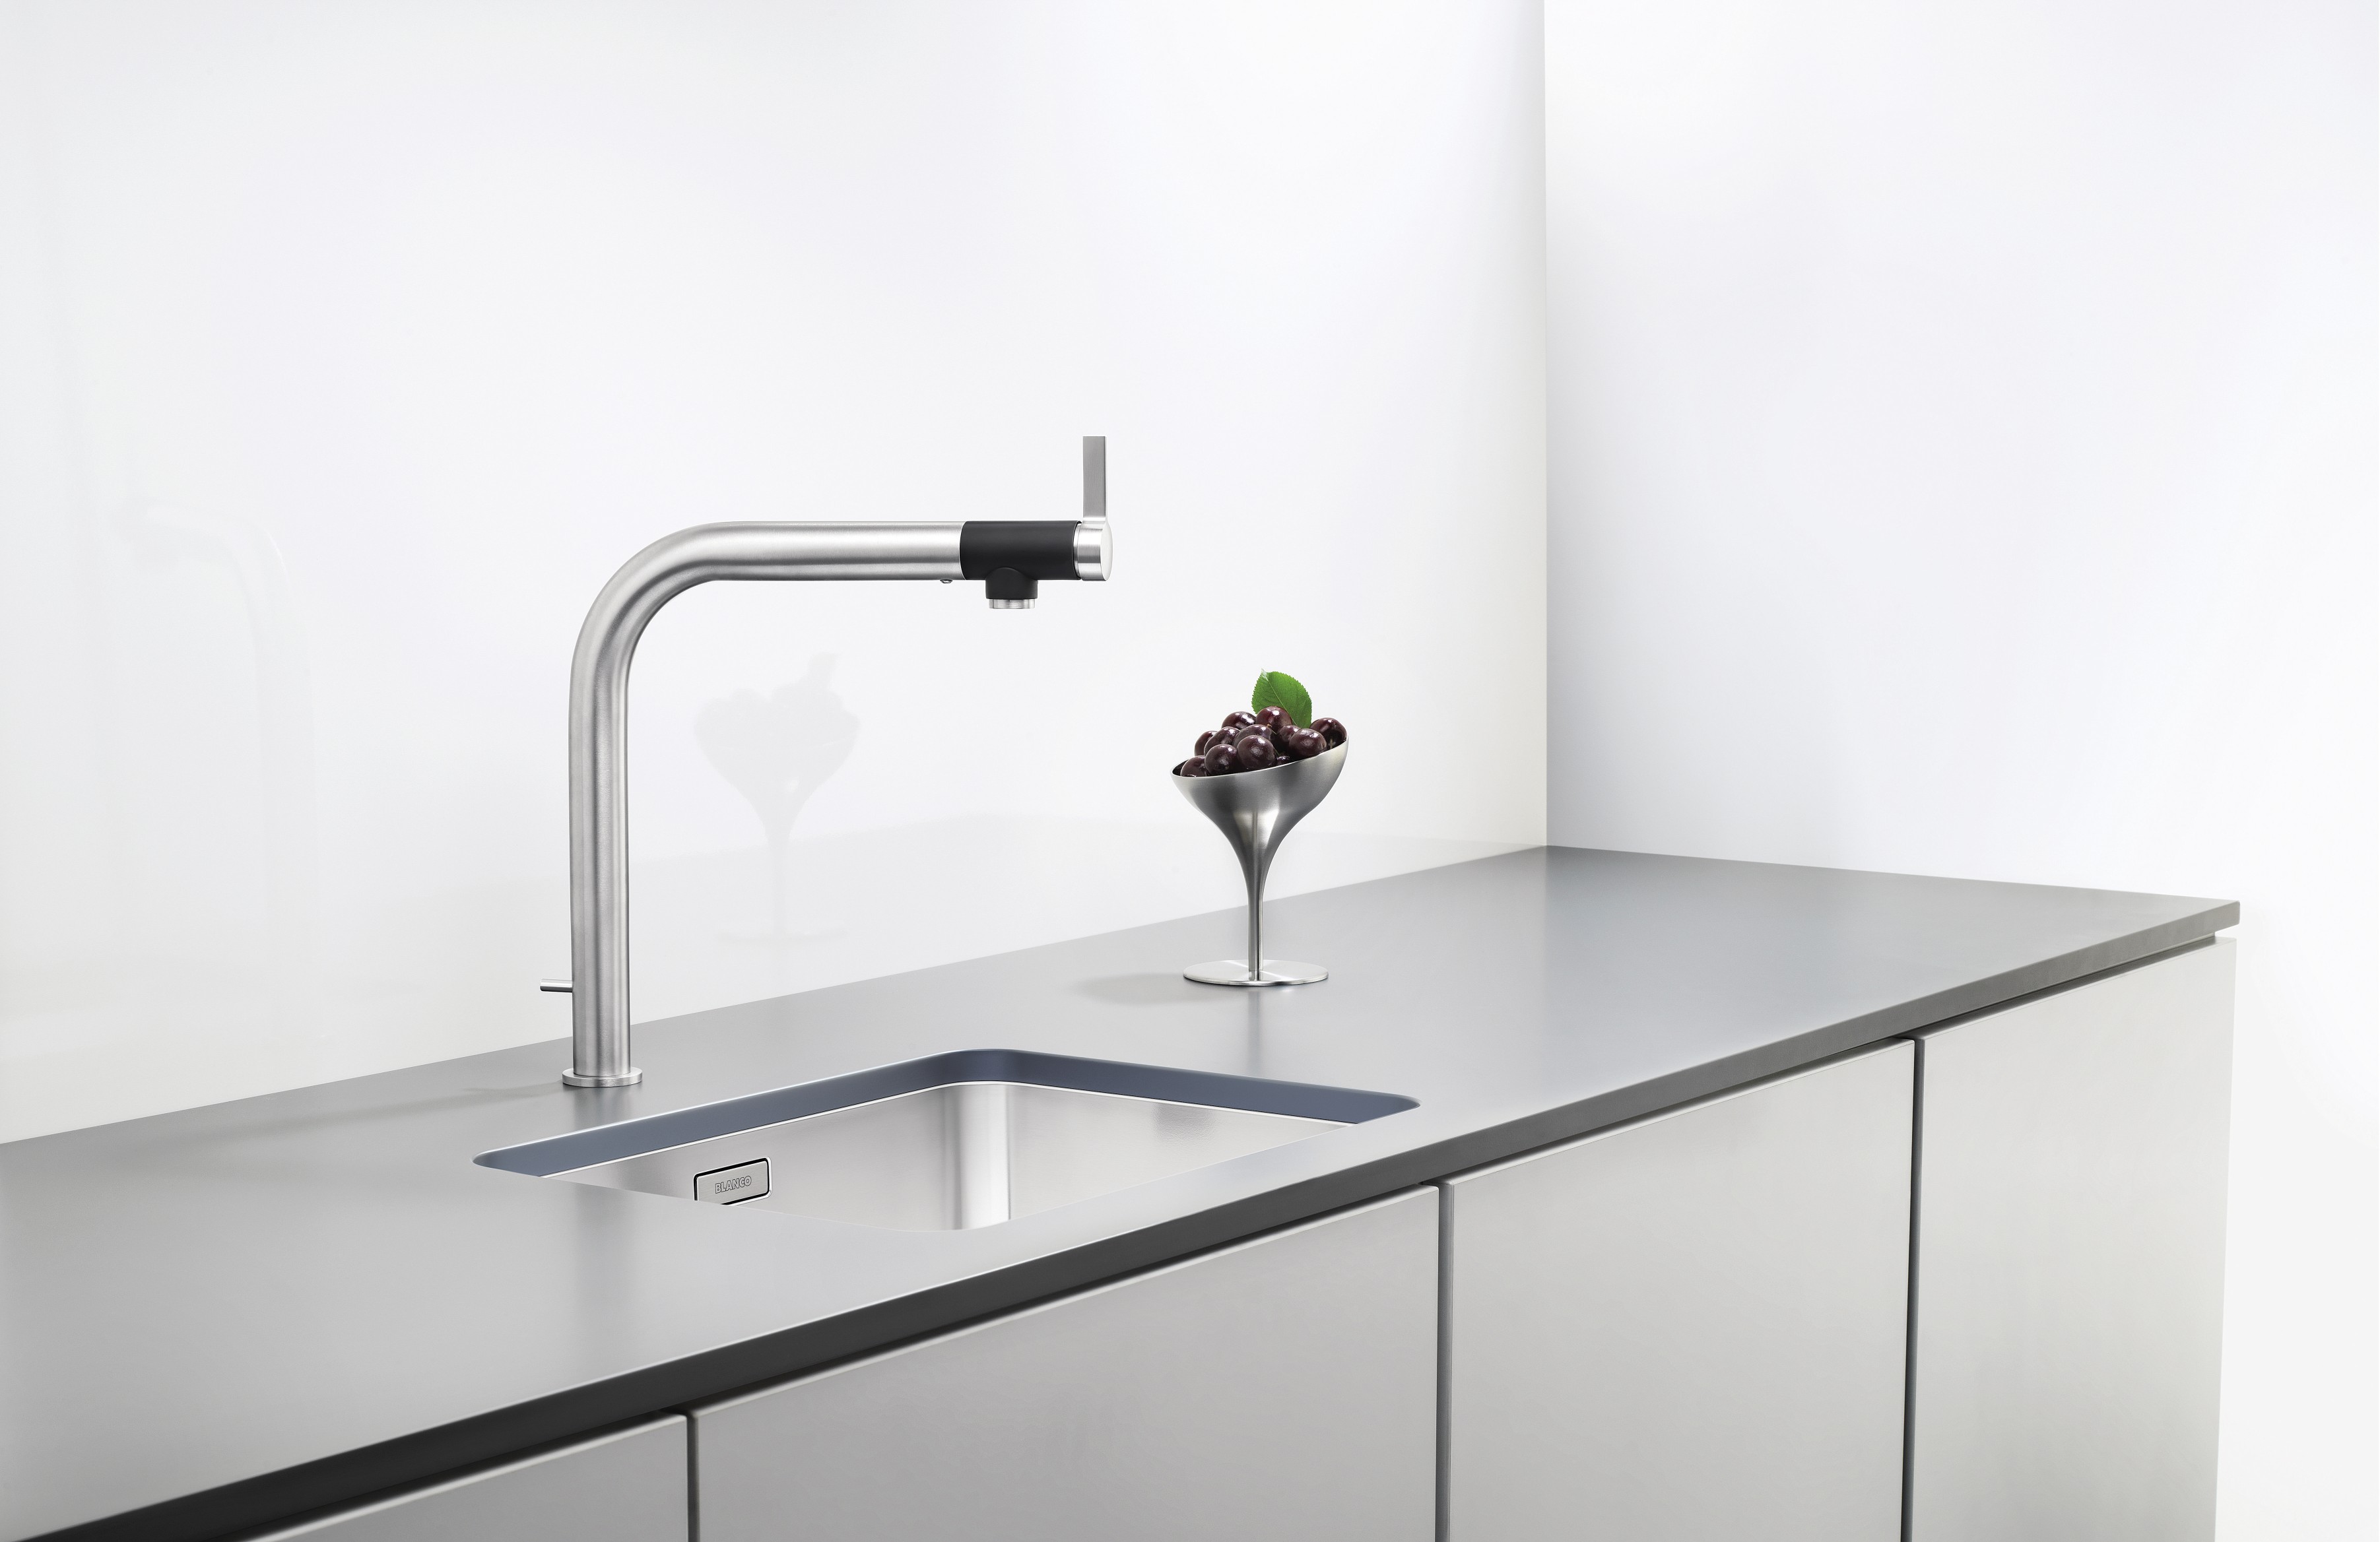 VONDA draws the eye with its beautiful details, and on second glance reveals itself to be a highly functional mixer tap, too